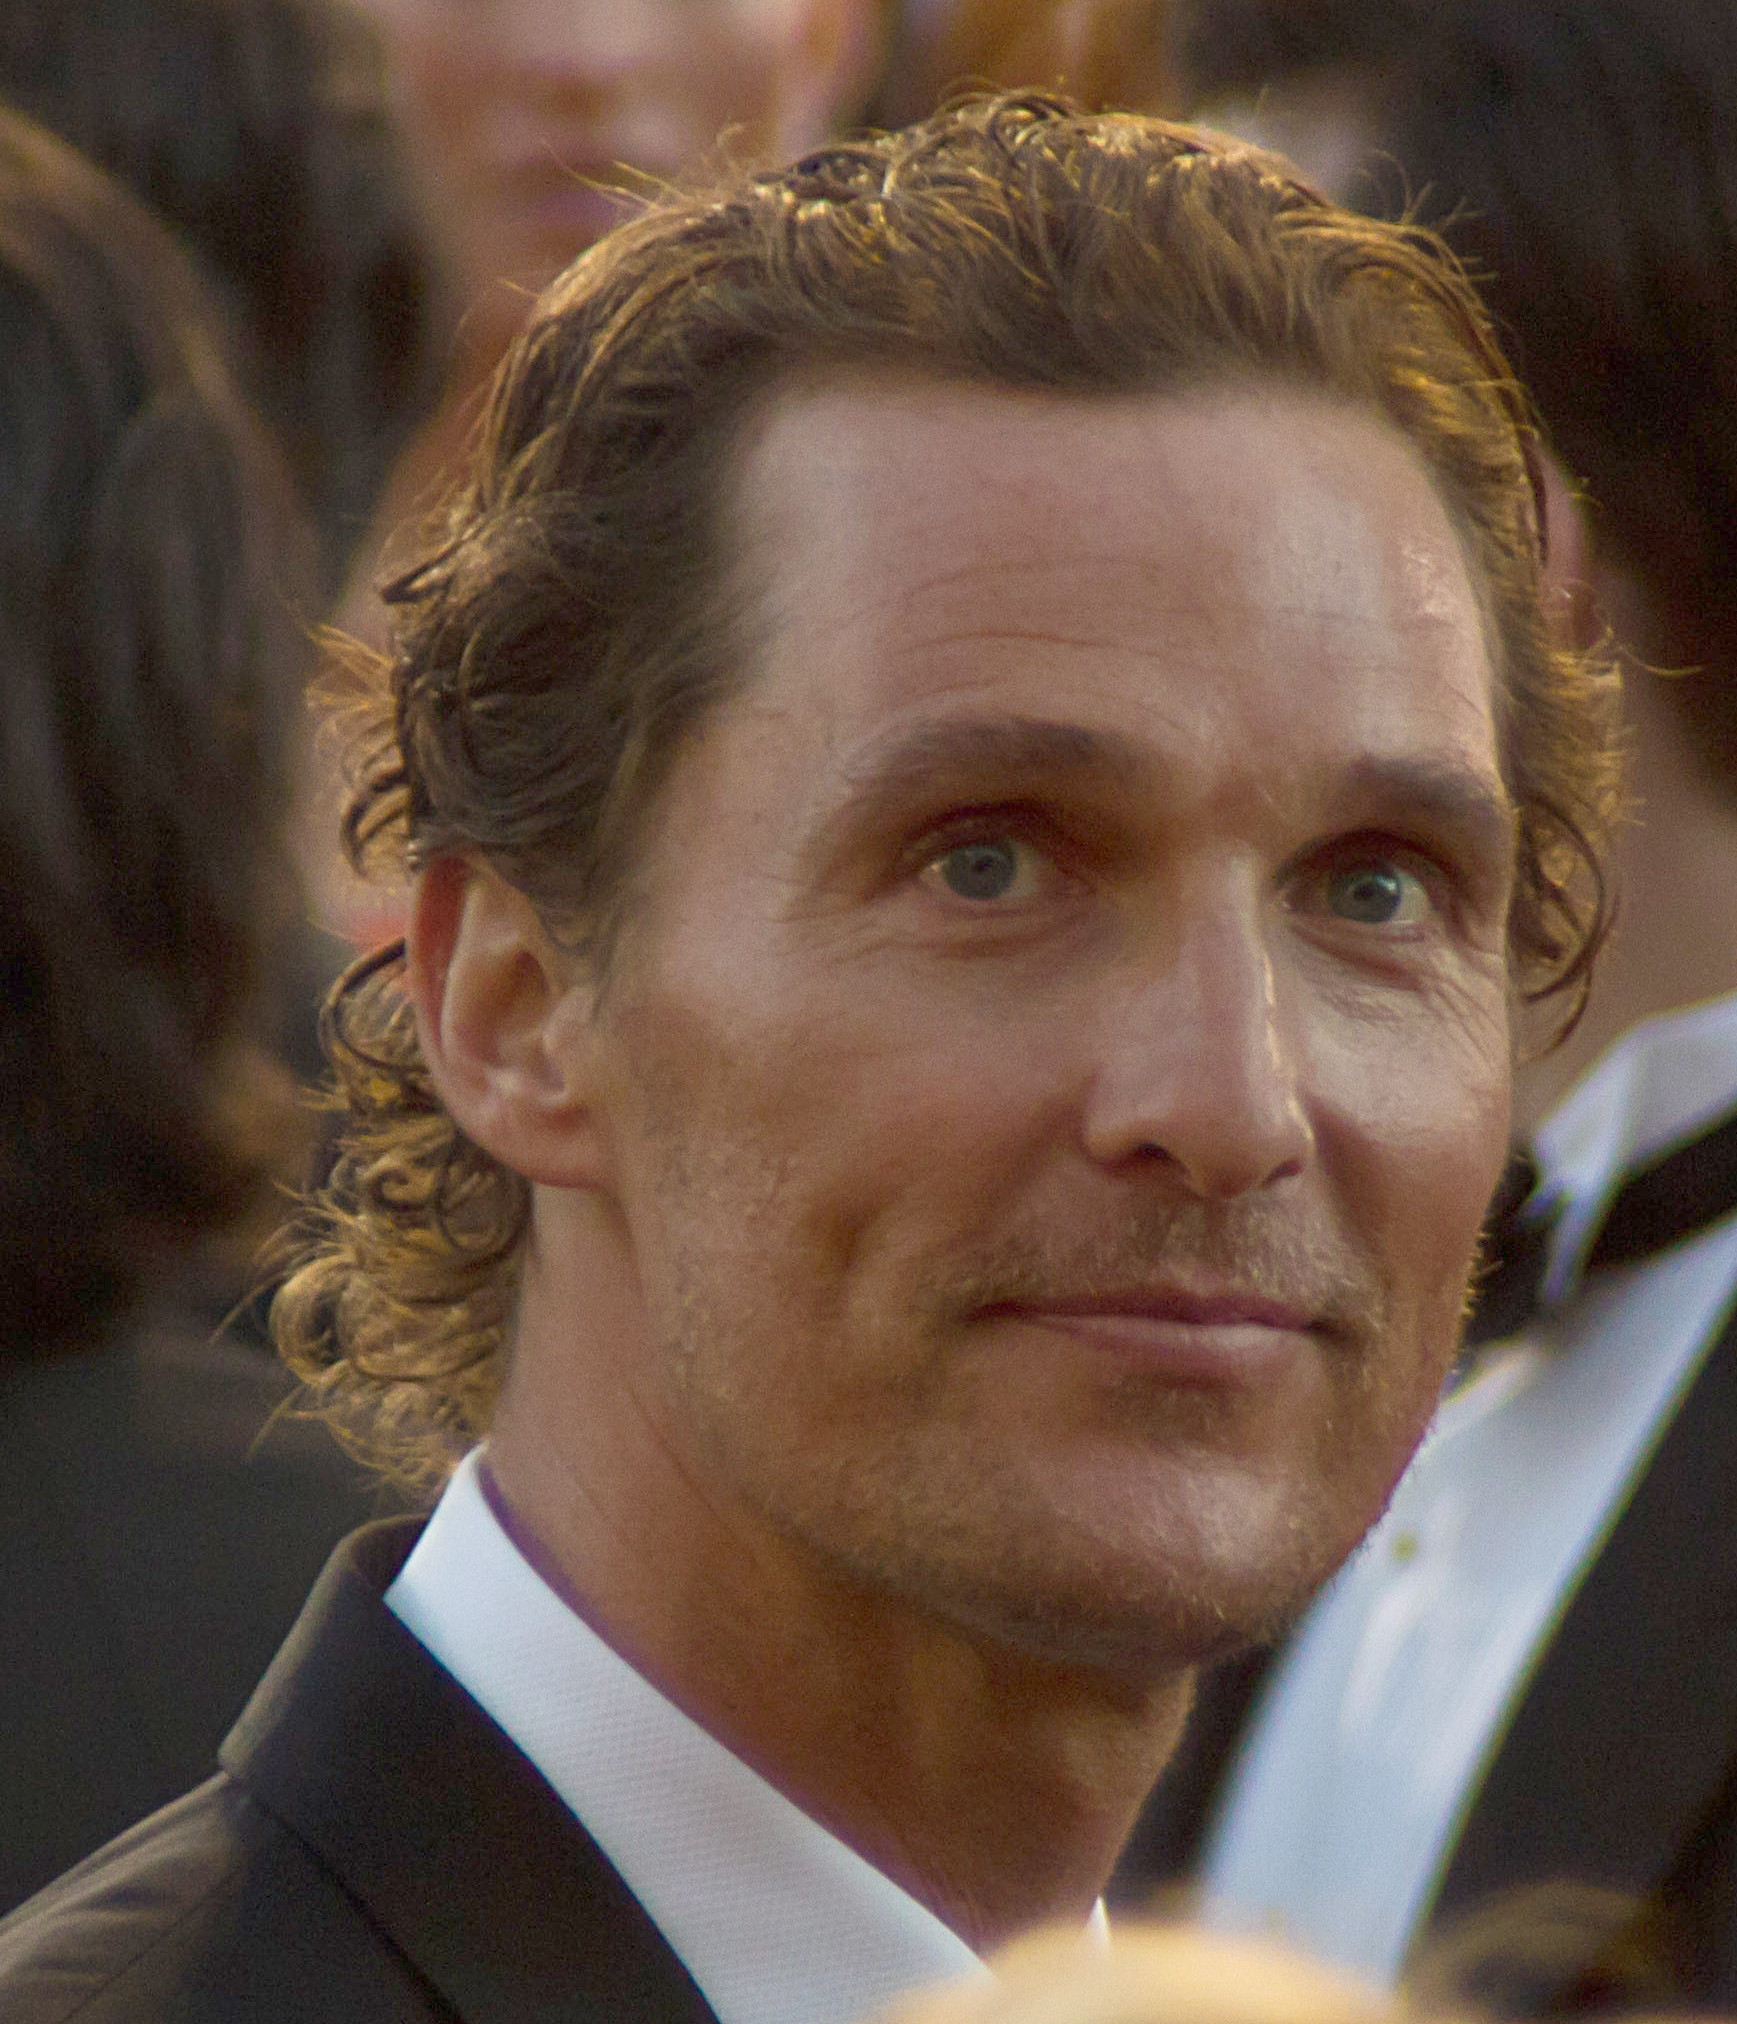 The 54-year old son of father James Donald McConaughey and mother Mary Kathleen "Kay" McCabe Matthew McConaughey in 2024 photo. Matthew McConaughey earned a  million dollar salary - leaving the net worth at 75 million in 2024